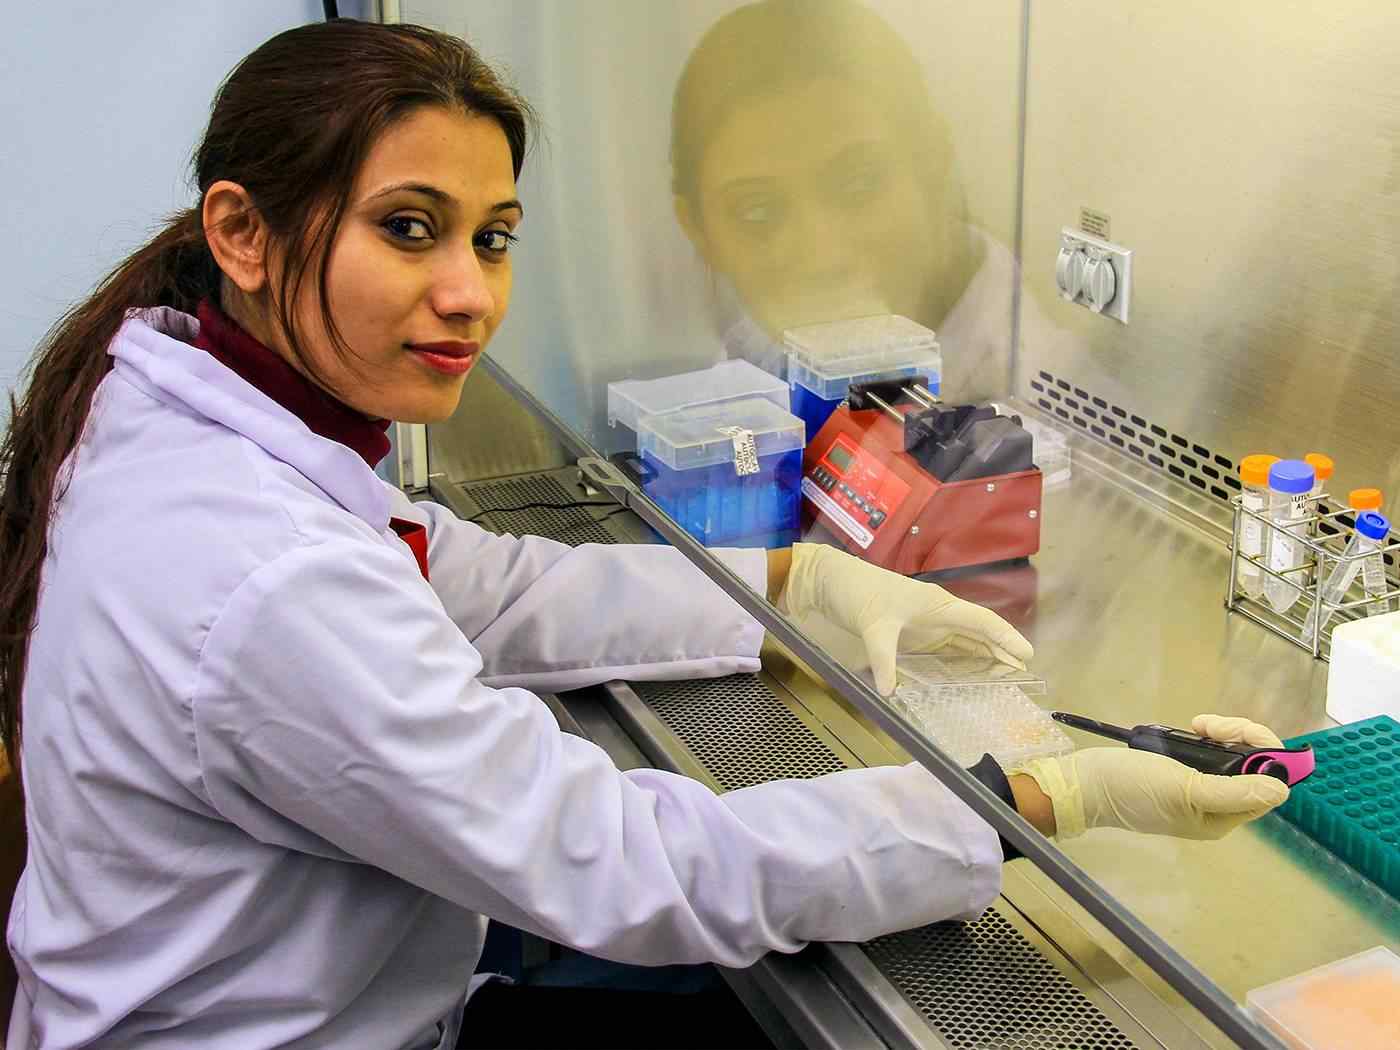 Female student working in the lab